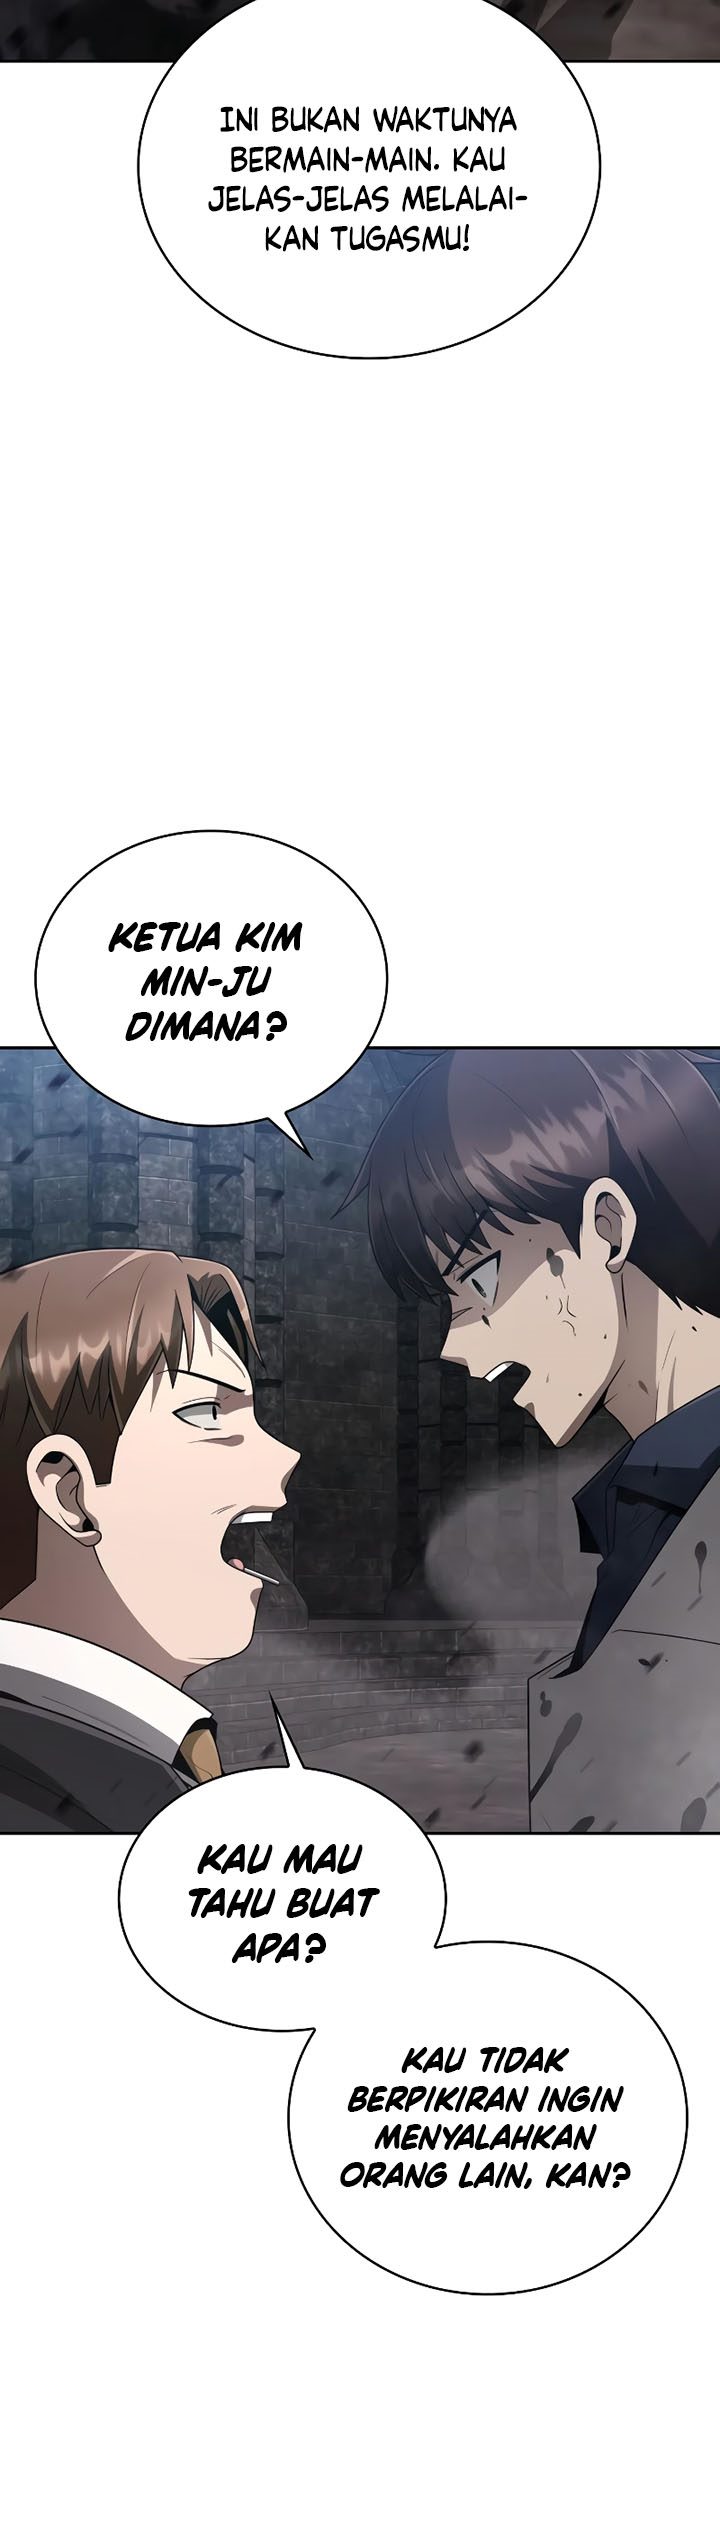 Dilarang COPAS - situs resmi www.mangacanblog.com - Komik clever cleaning life of the returned genius hunter 016 - chapter 16 17 Indonesia clever cleaning life of the returned genius hunter 016 - chapter 16 Terbaru 21|Baca Manga Komik Indonesia|Mangacan